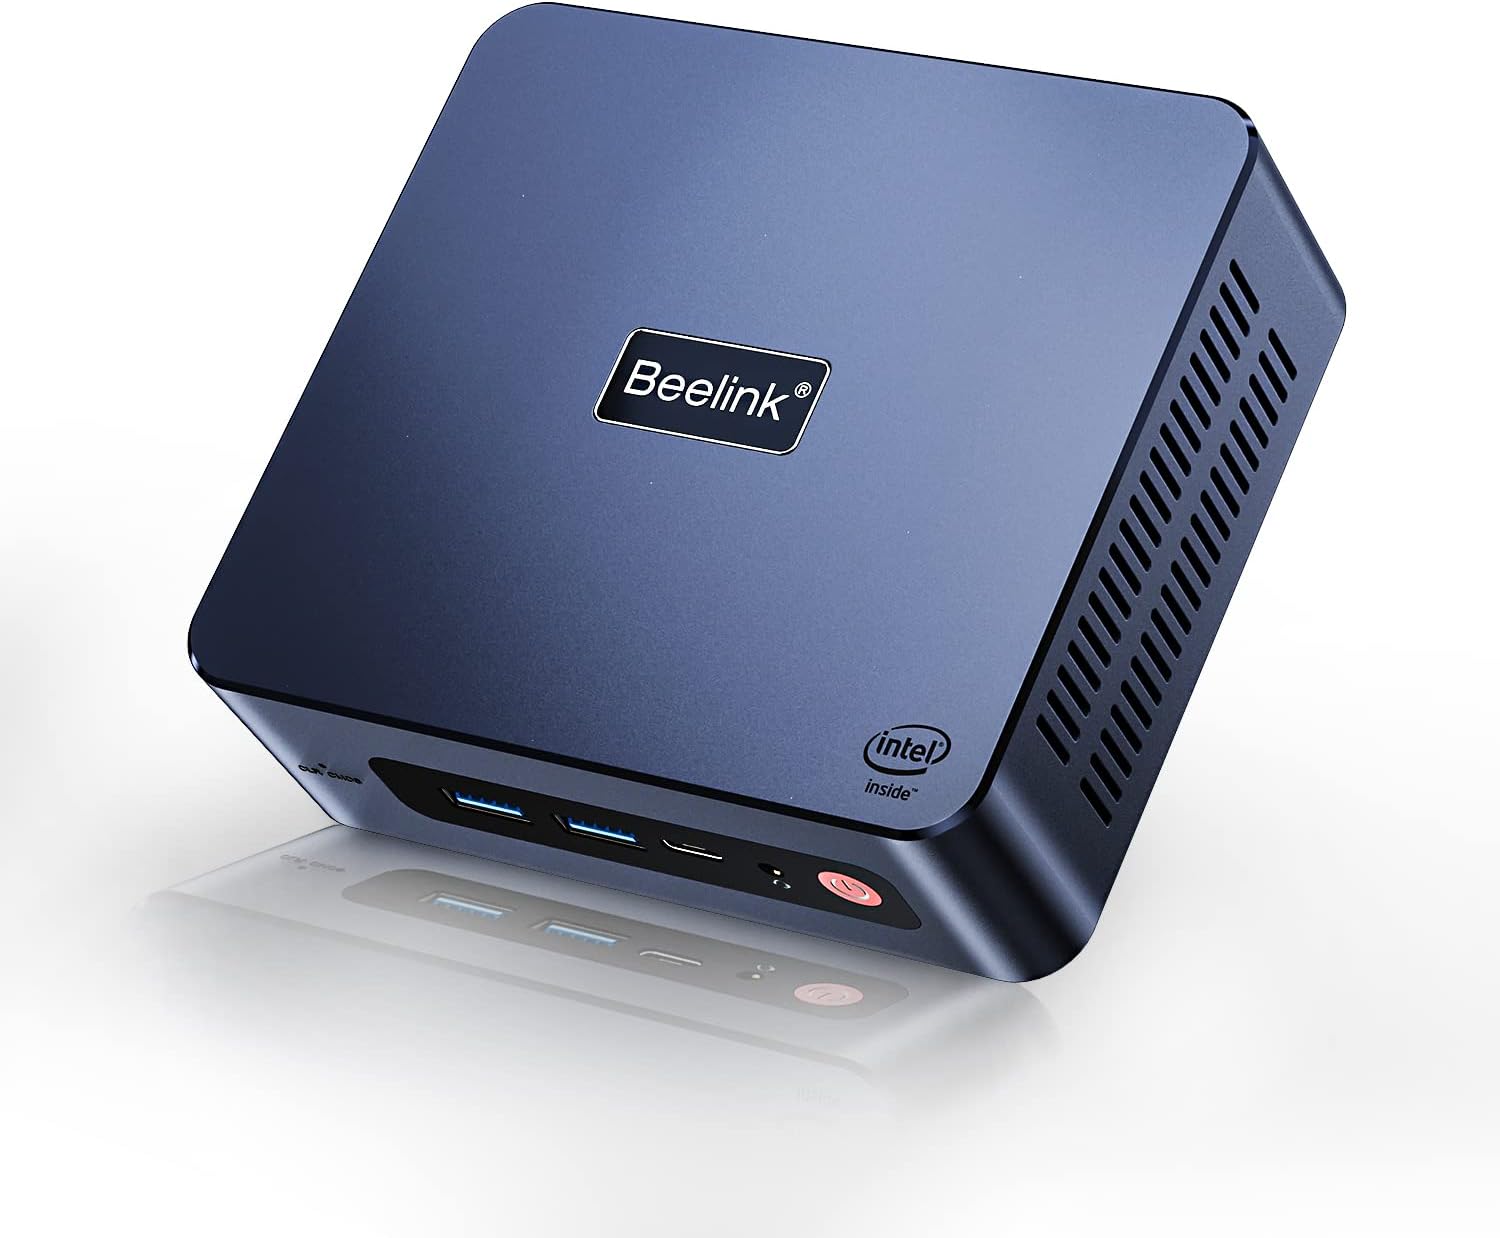 Beelink New 11th Generation Intel 4 Core N5105 Processor (up to 2.9GHZ), Mini PC,Mini Computer with 8GB DDR4 RAM/500GB M.2 SATA SSD, Supports Extended HDD  SSD/4K/Dual HDMI/WiFi5/BT4.0